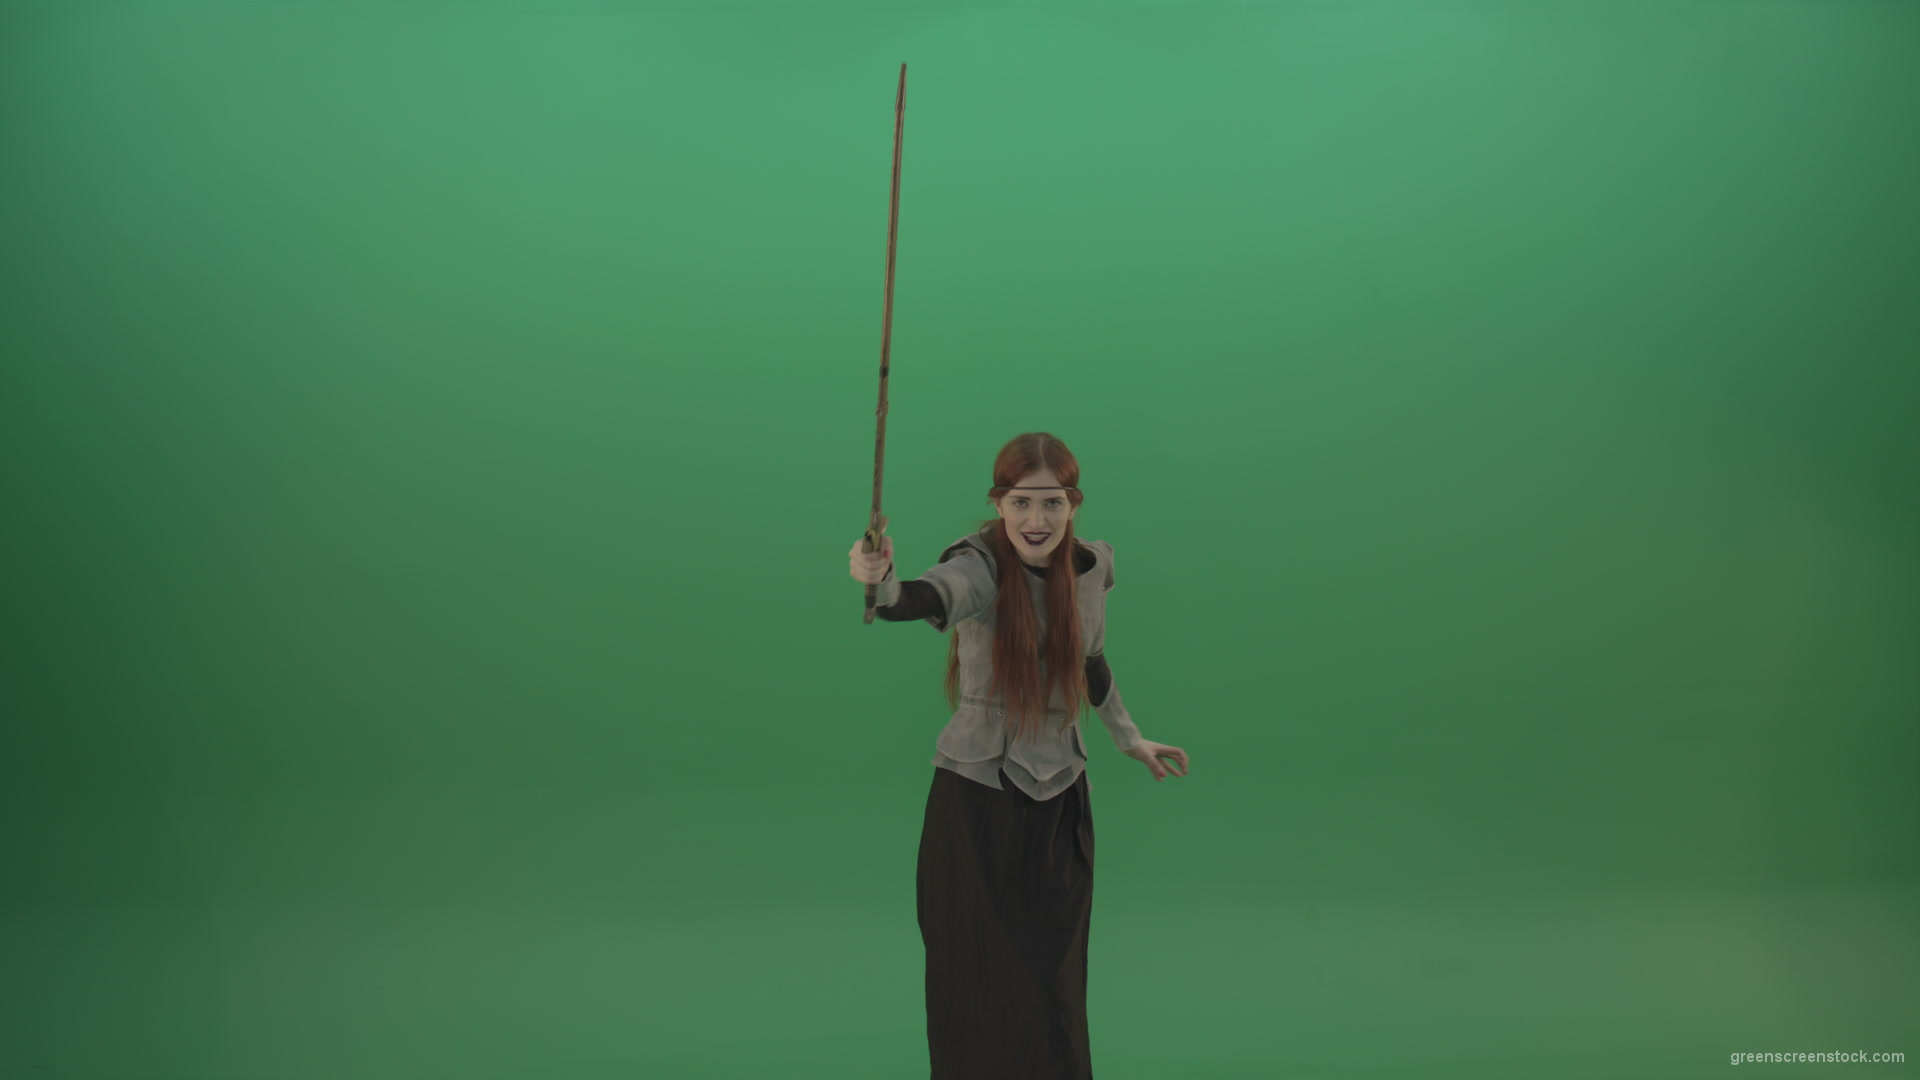 Girl-shouts-her-foes-on-an-offensive-raising-a-sword-up-on-a-green-background_009 Green Screen Stock